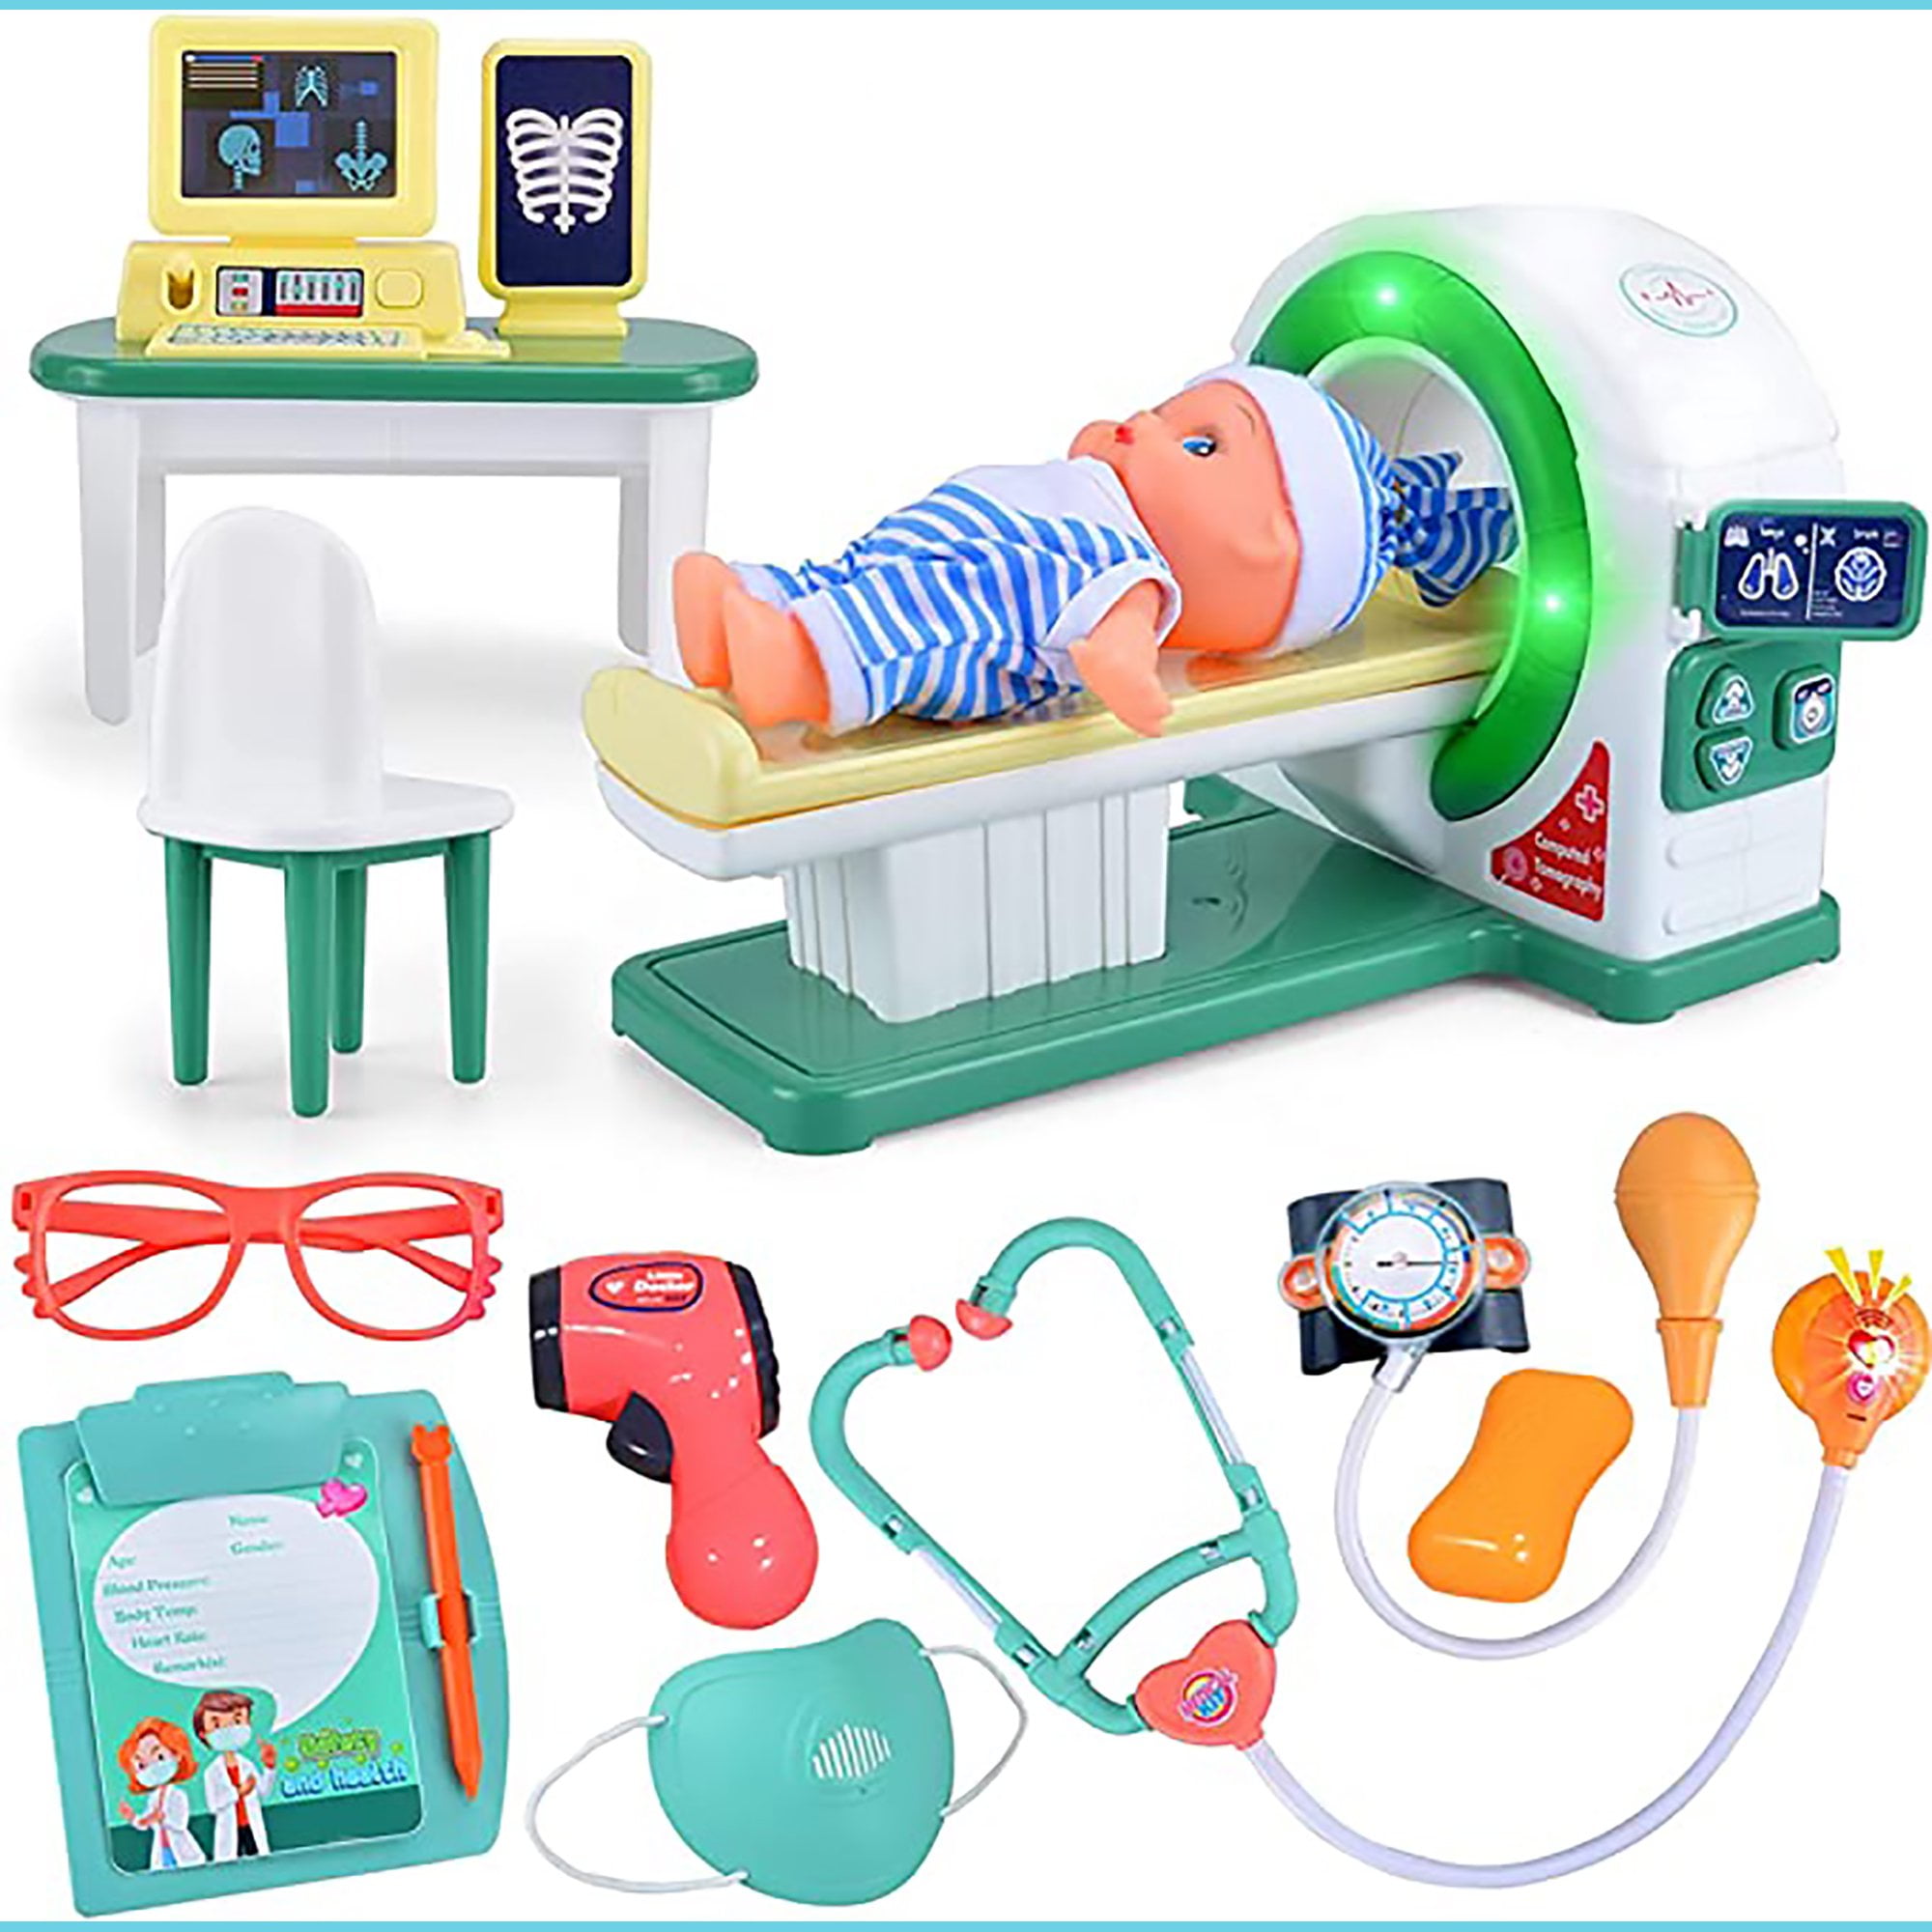 Details about   Kids Doctor Kit,45 Pcs Pretend Play Toys Medical Toy with Electronic Stethoscope 